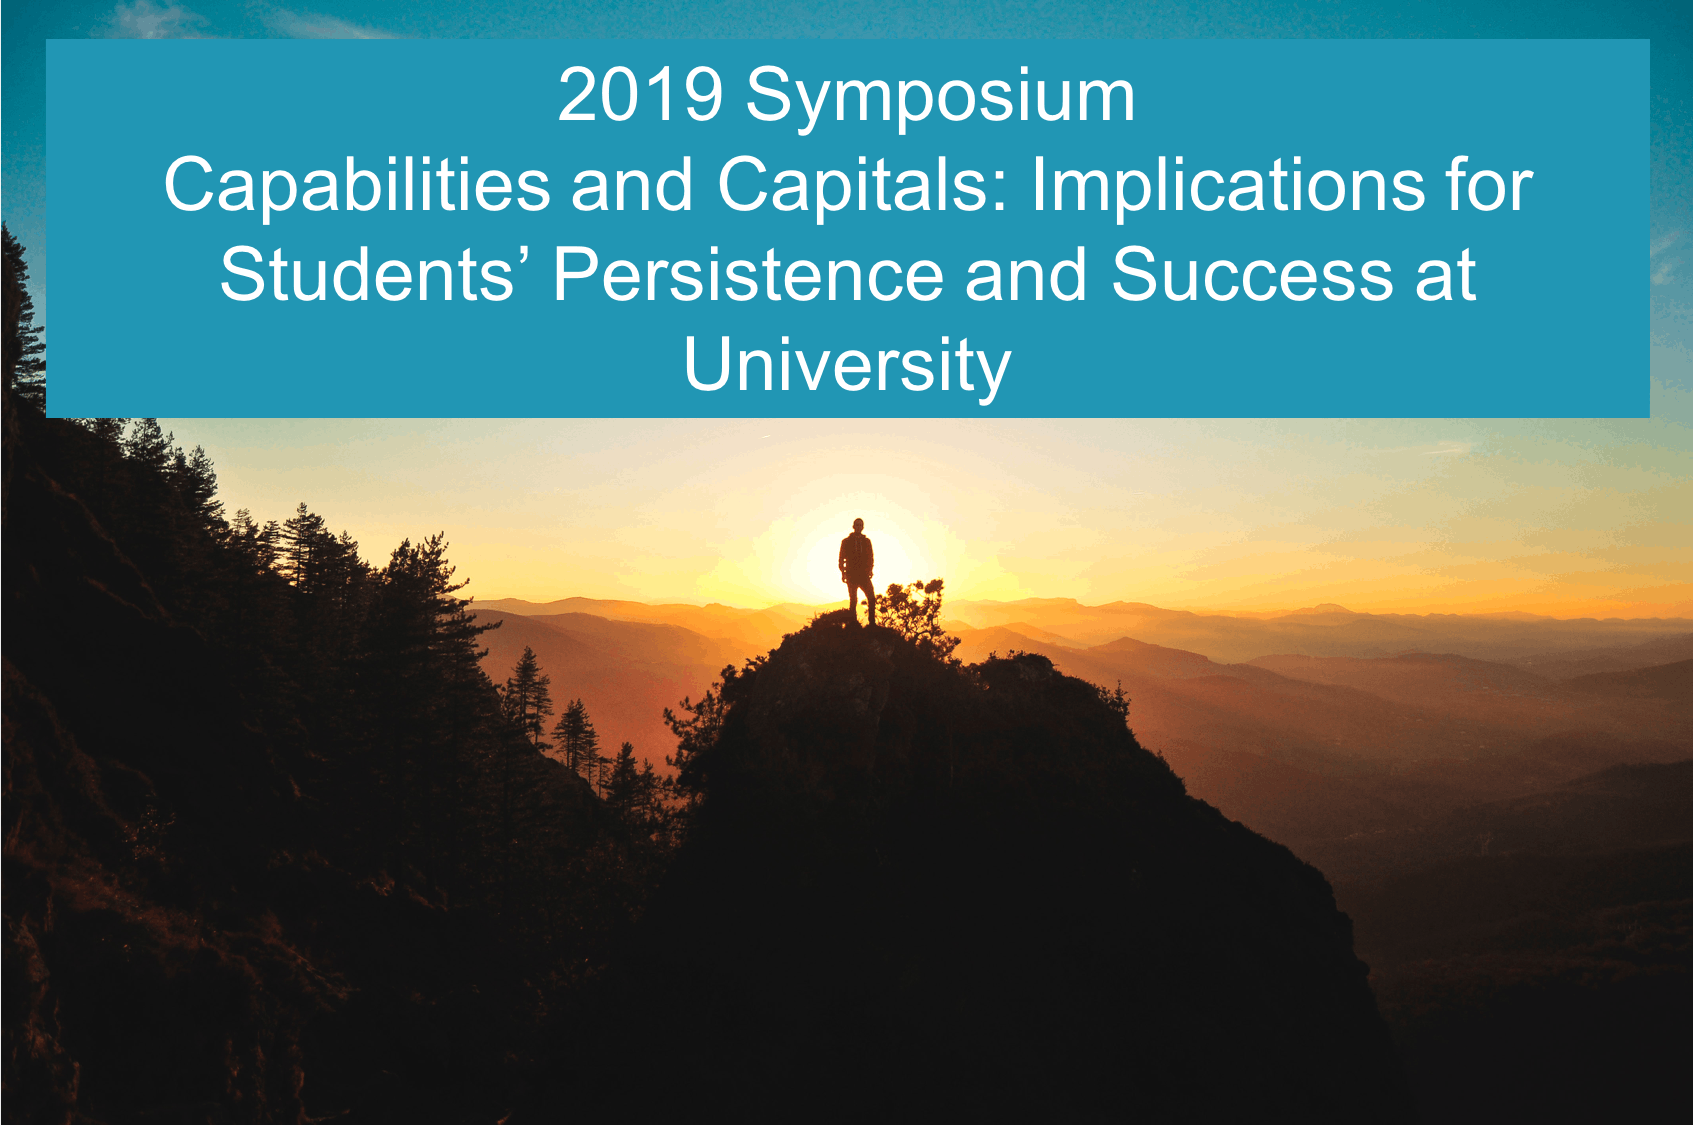 2019 Symposium - Capabilites and Capitals: Student Persistence and Success at university